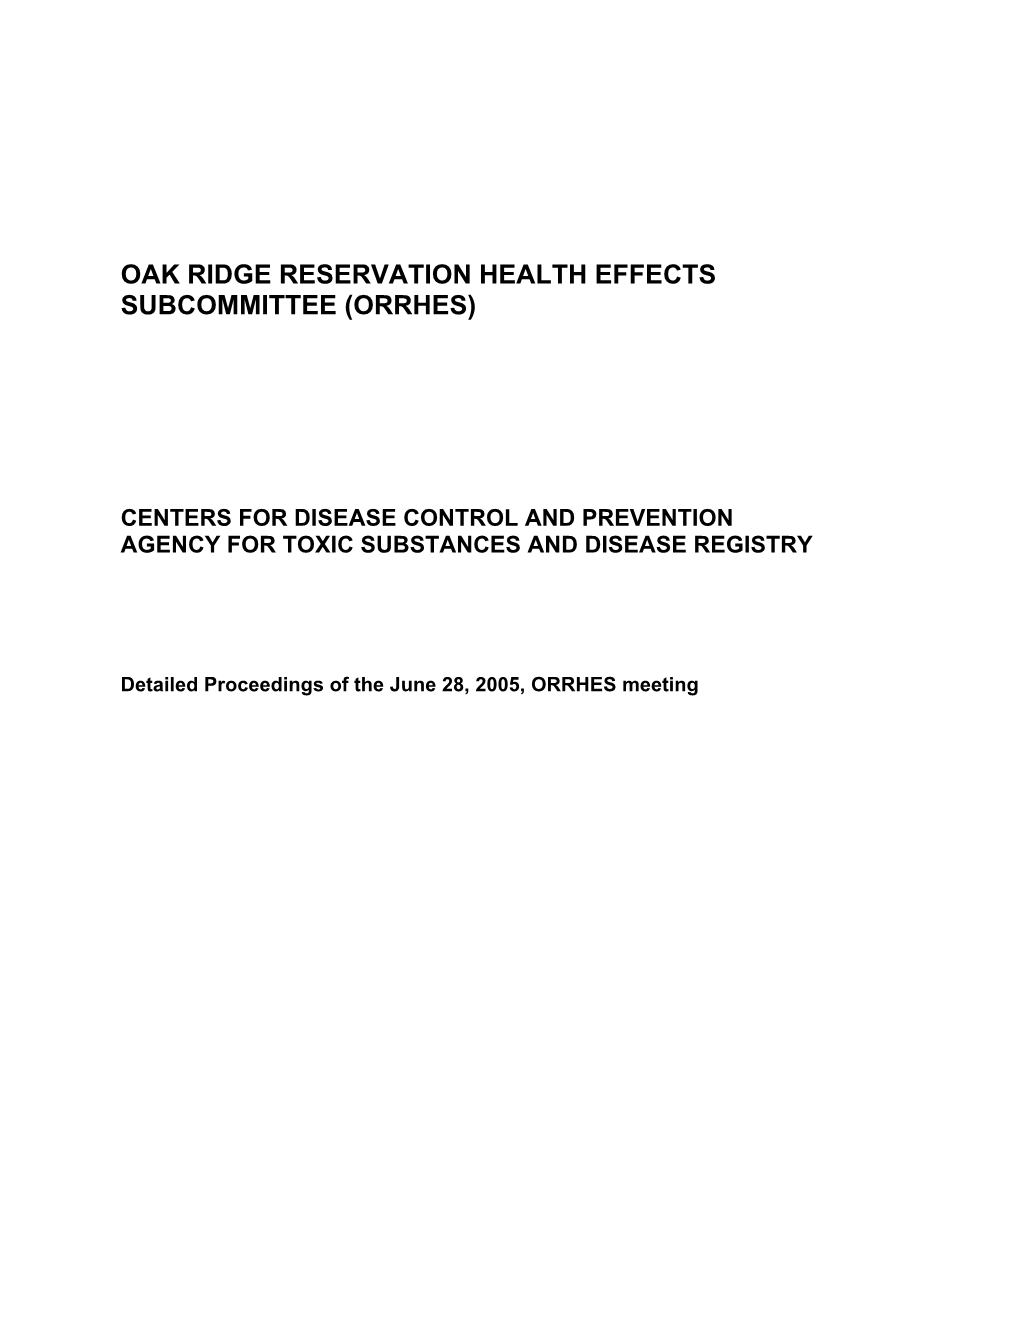 Oak Ridge Reservation Health Effects Subcommittee (Orrhes)